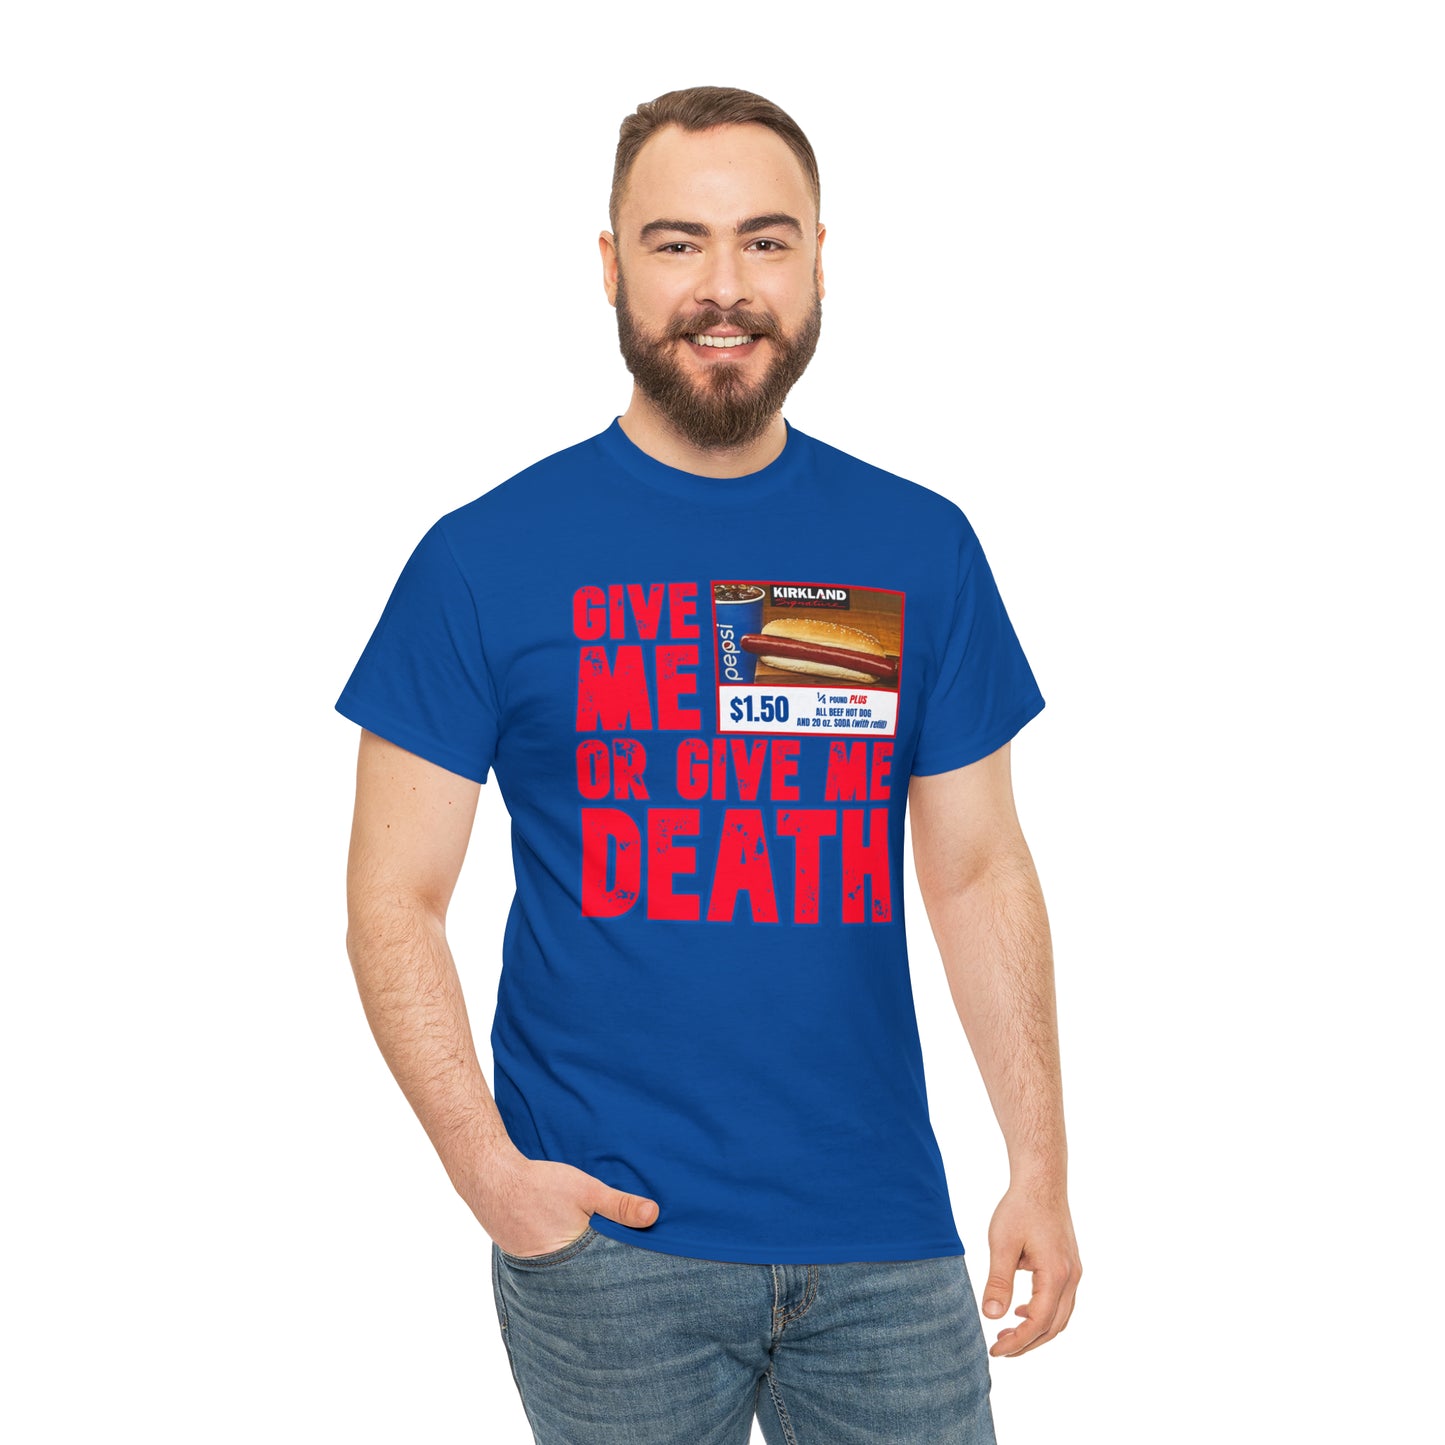 Give me costco $1.50 hotdog or give me death - Unisex Heavy Cotton Tee